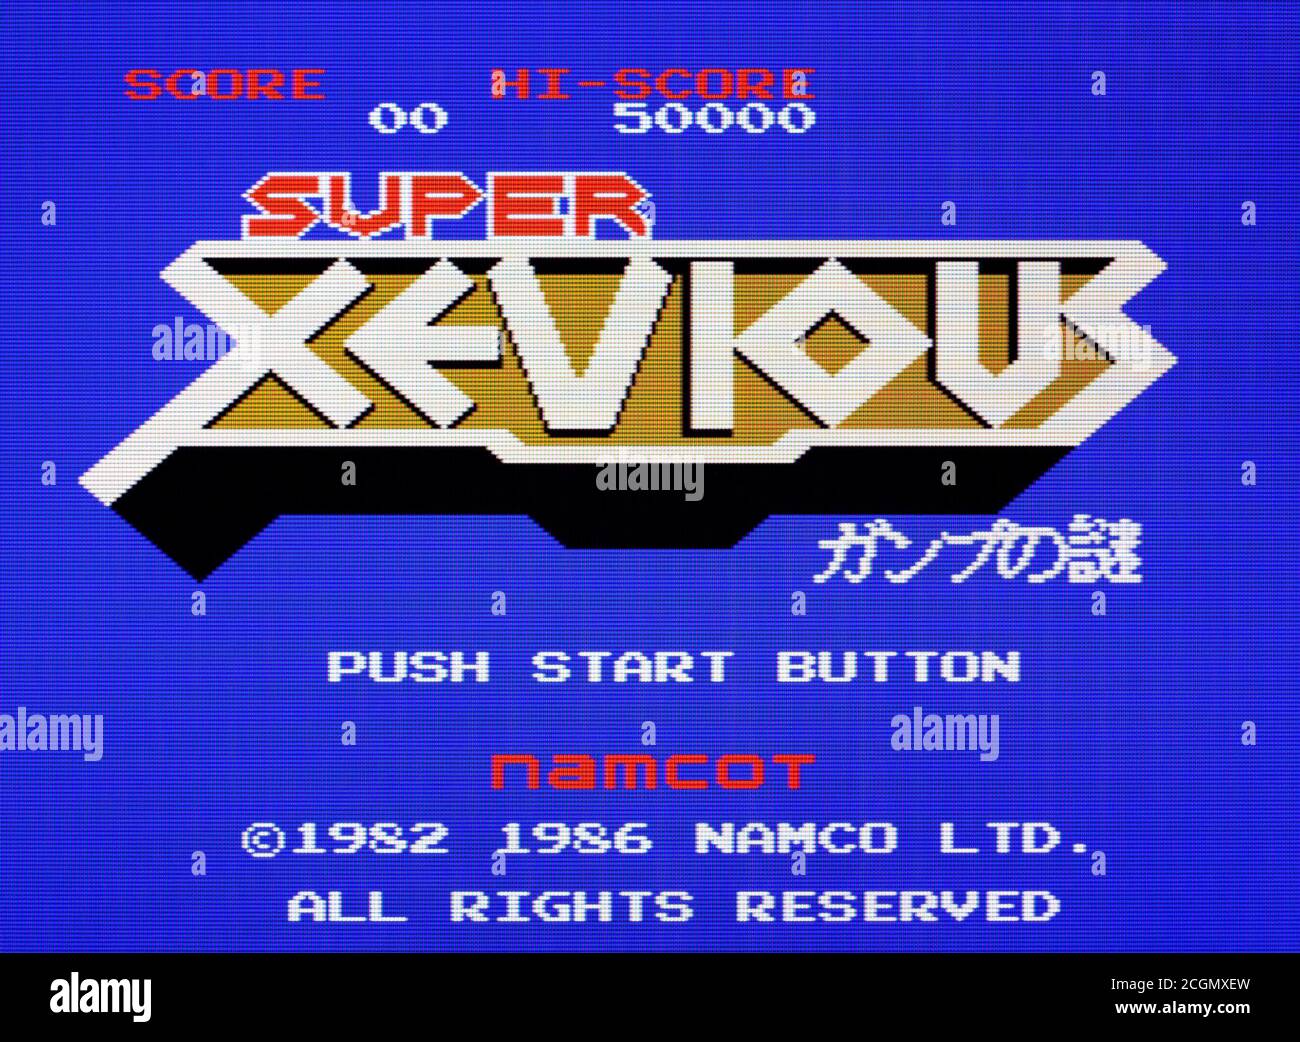 Super Xevious - Nintendo Entertainment System - NES Videogame - Editorial use only Stock Photo